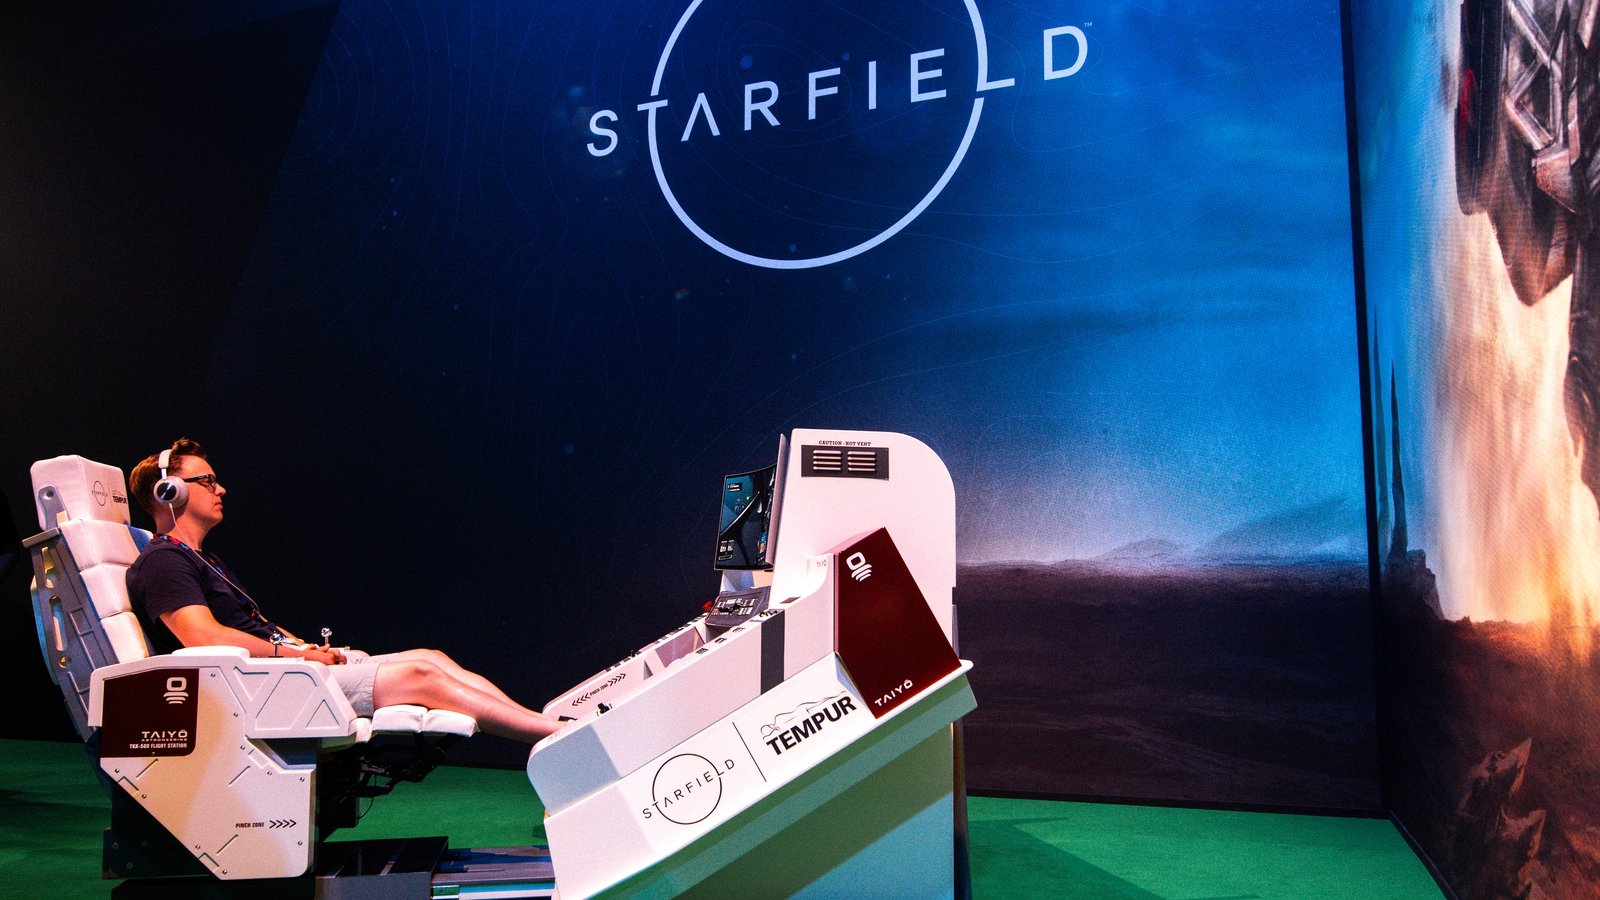 Report: Starfield Was The Best-Selling U.S. Video Game In